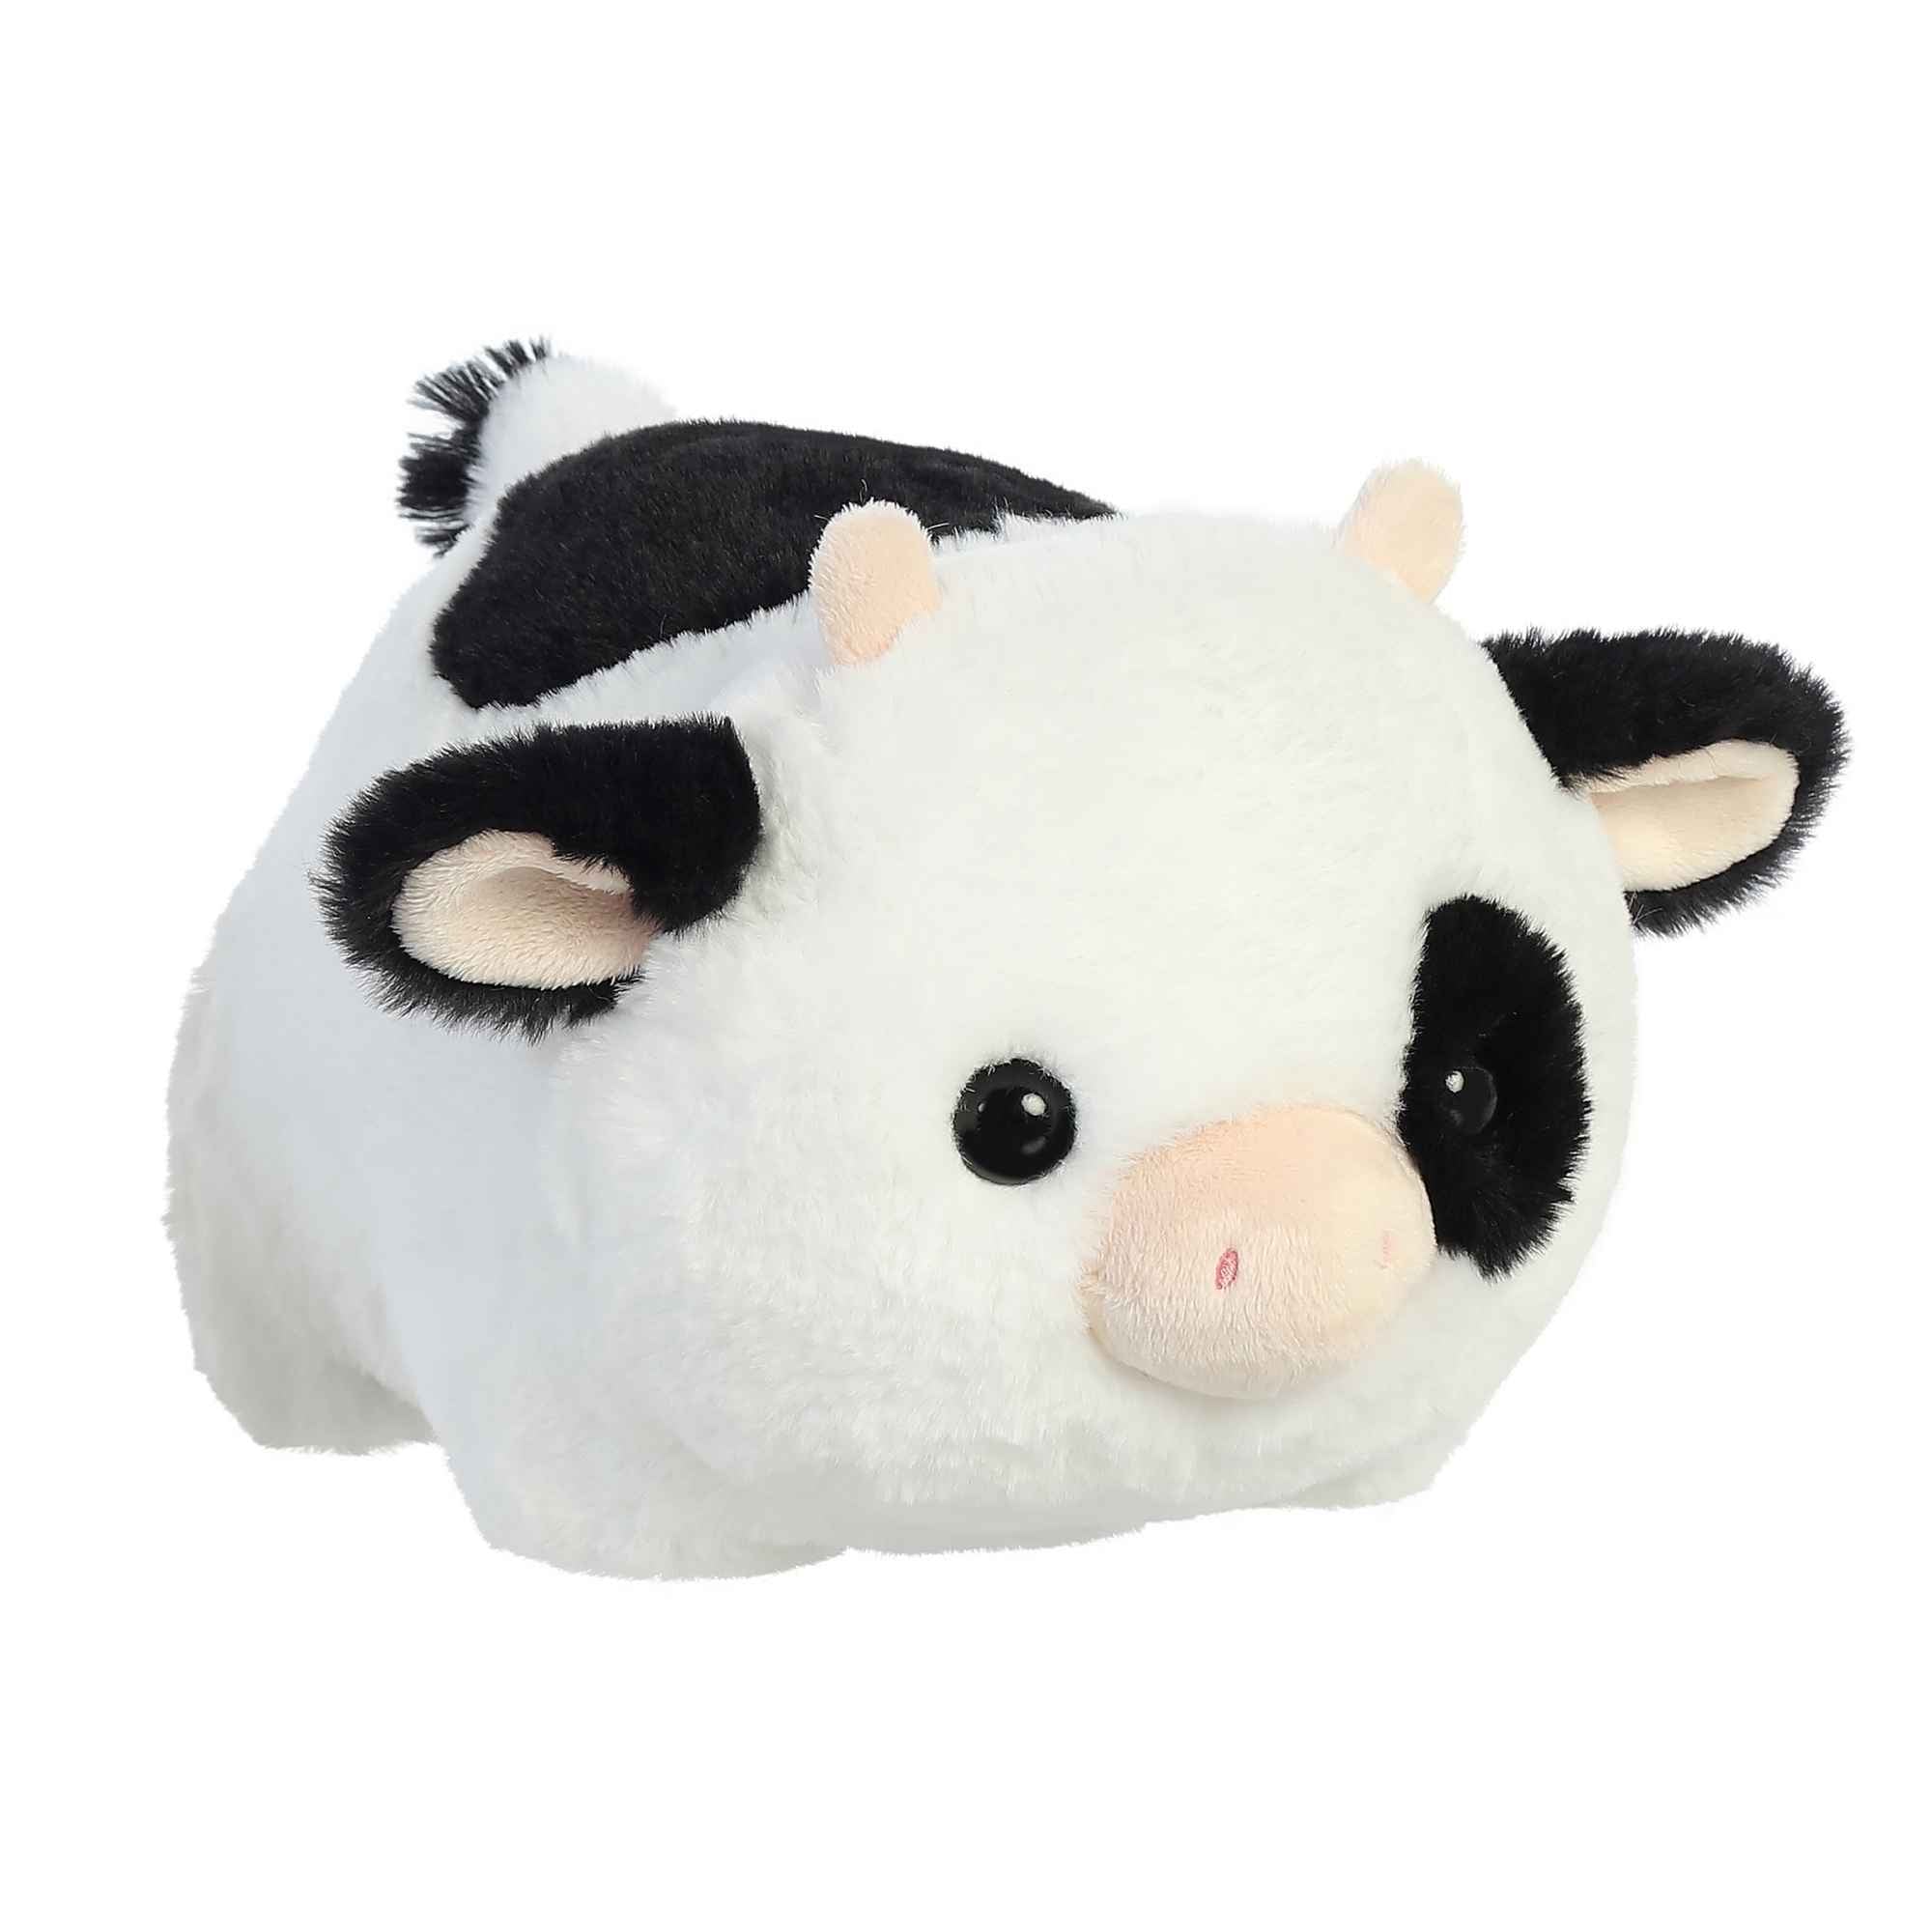 Tutie Cow plush from the Spudsters Collection by Aurora, featuring a soft black and white coat in a rounded potato shape